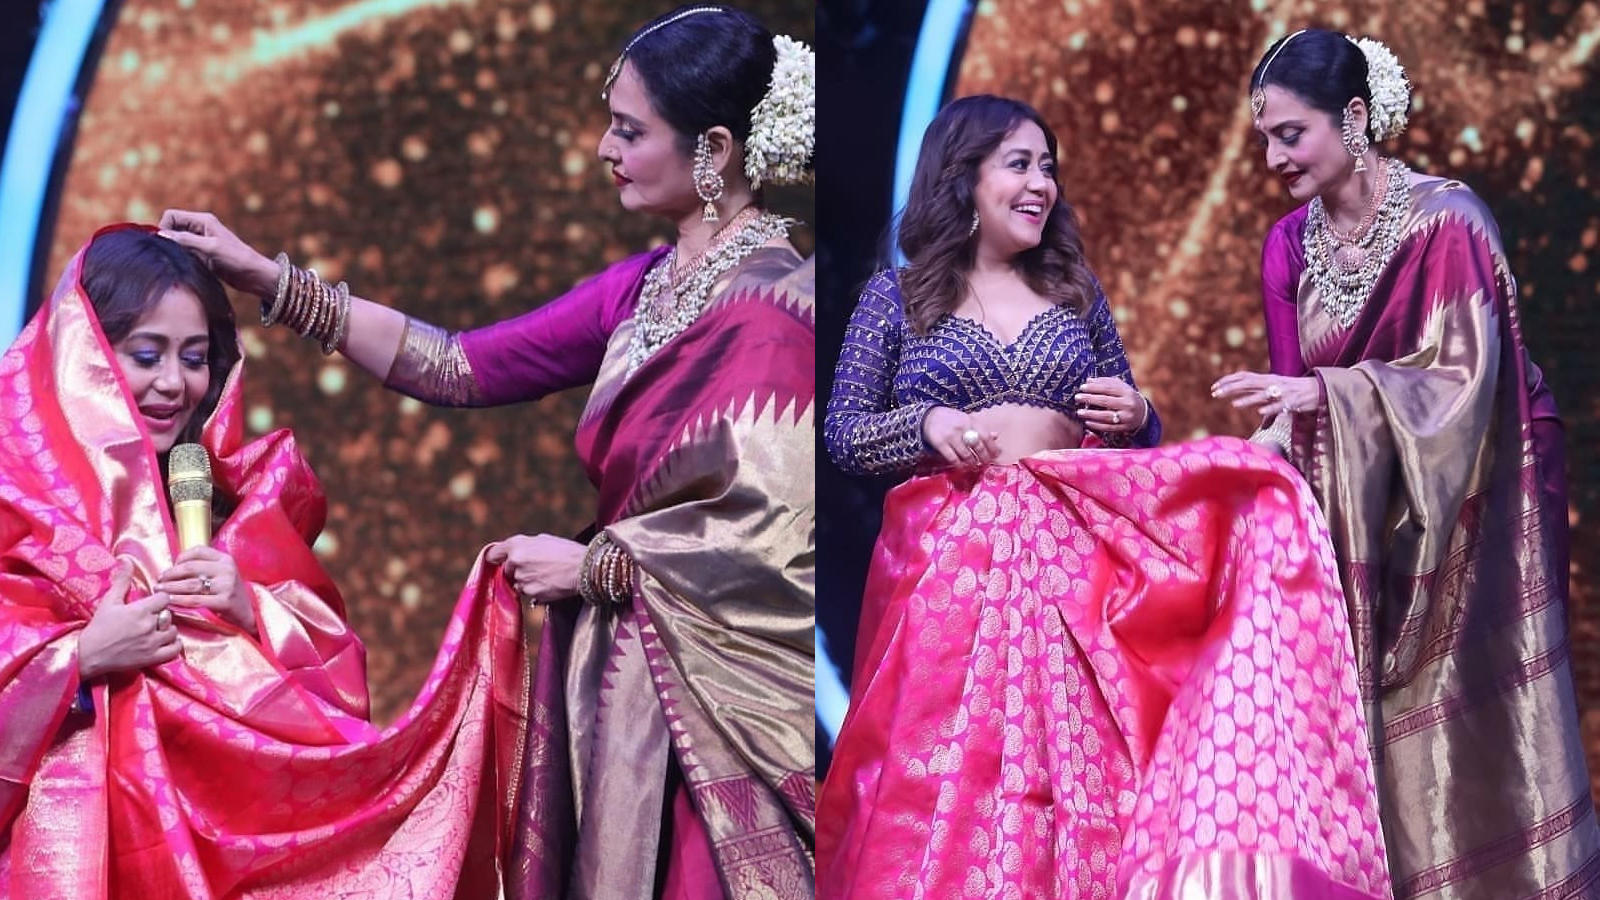 Checkout! The pictures of Rekha gifting ‘shadi ka shagun’ and a handwritten note to Neha Kakkar on Indian Idol 12